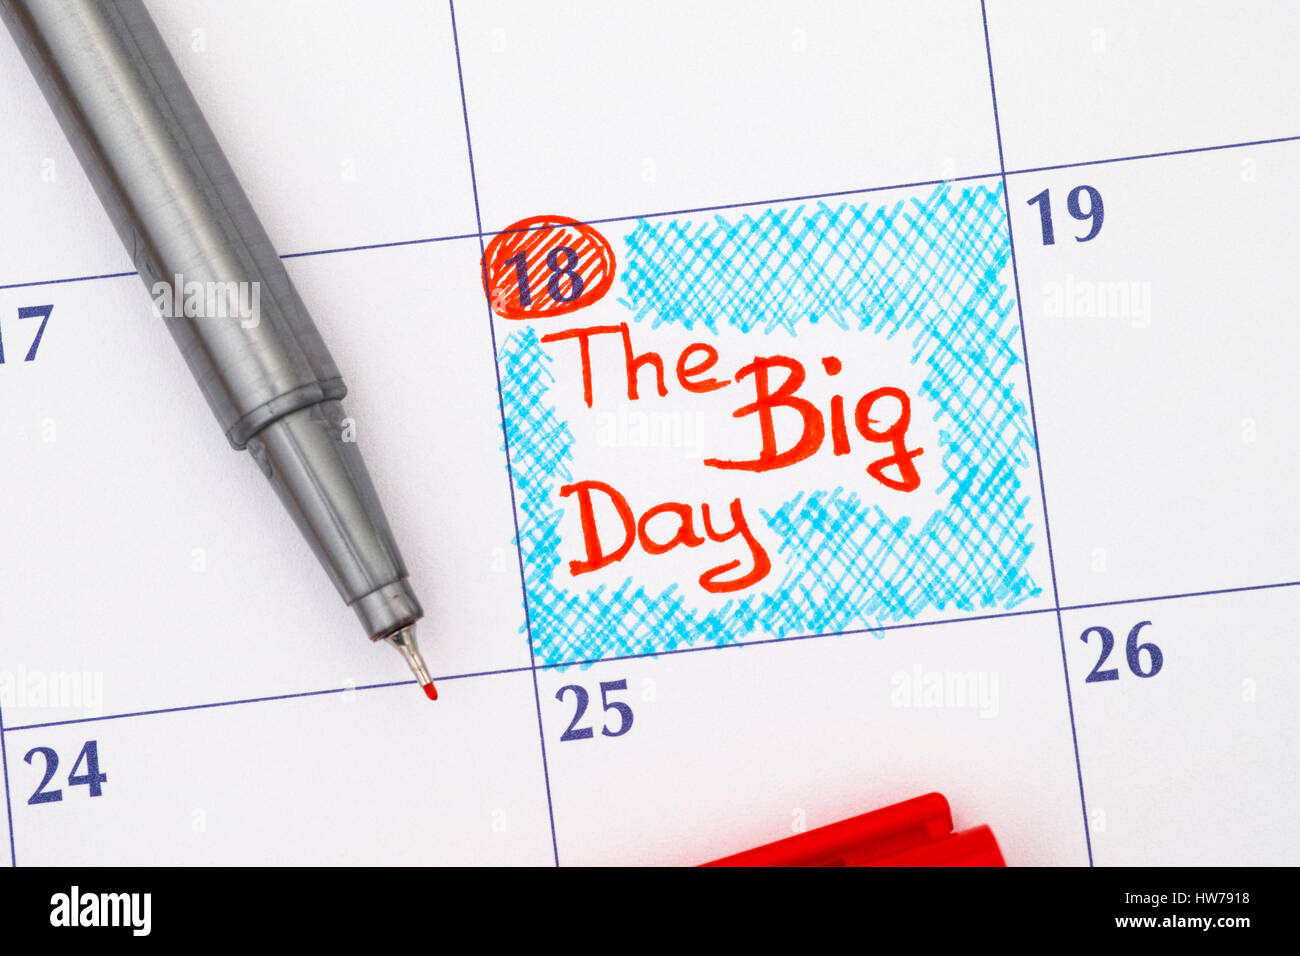 Reminder The Big Day in calendar with red pen. Stock Photo